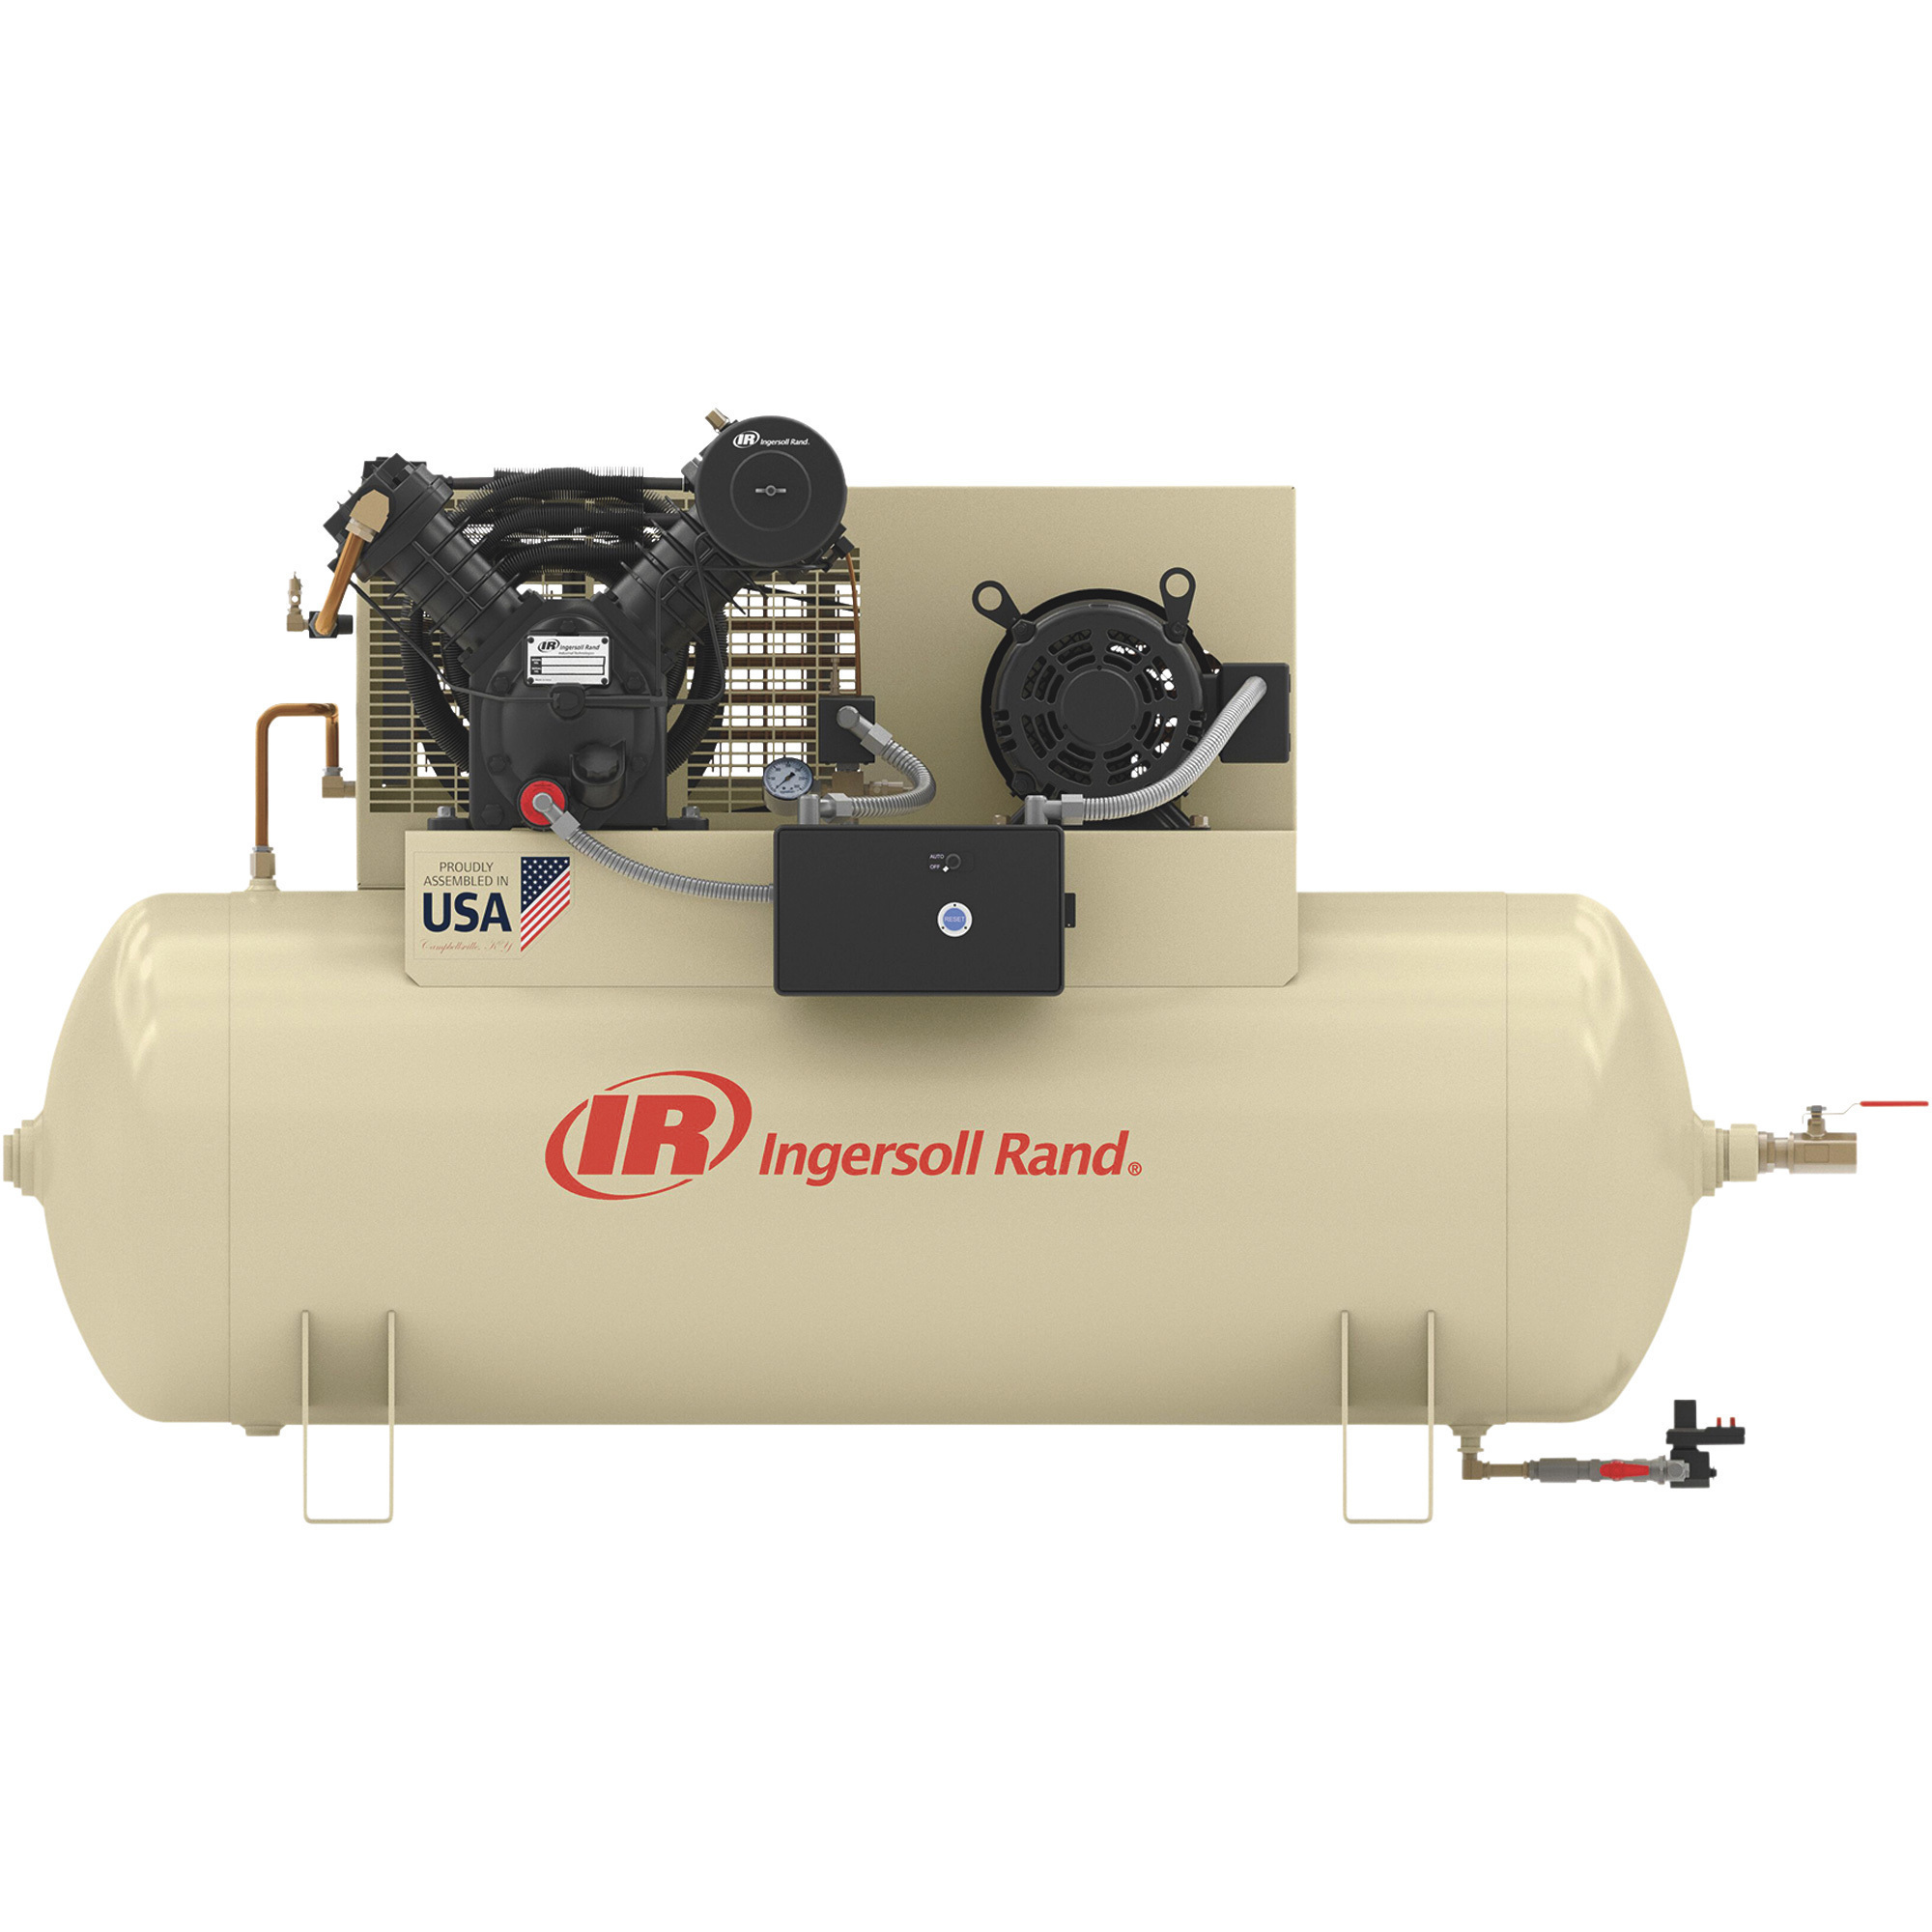 Ingersoll Rand Type-30 Reciprocating Air Compressor (Premium Package), 10 HP, 230 Volt, 3 Phase, 120 Gallon Horizontal, Model 2545E10-P